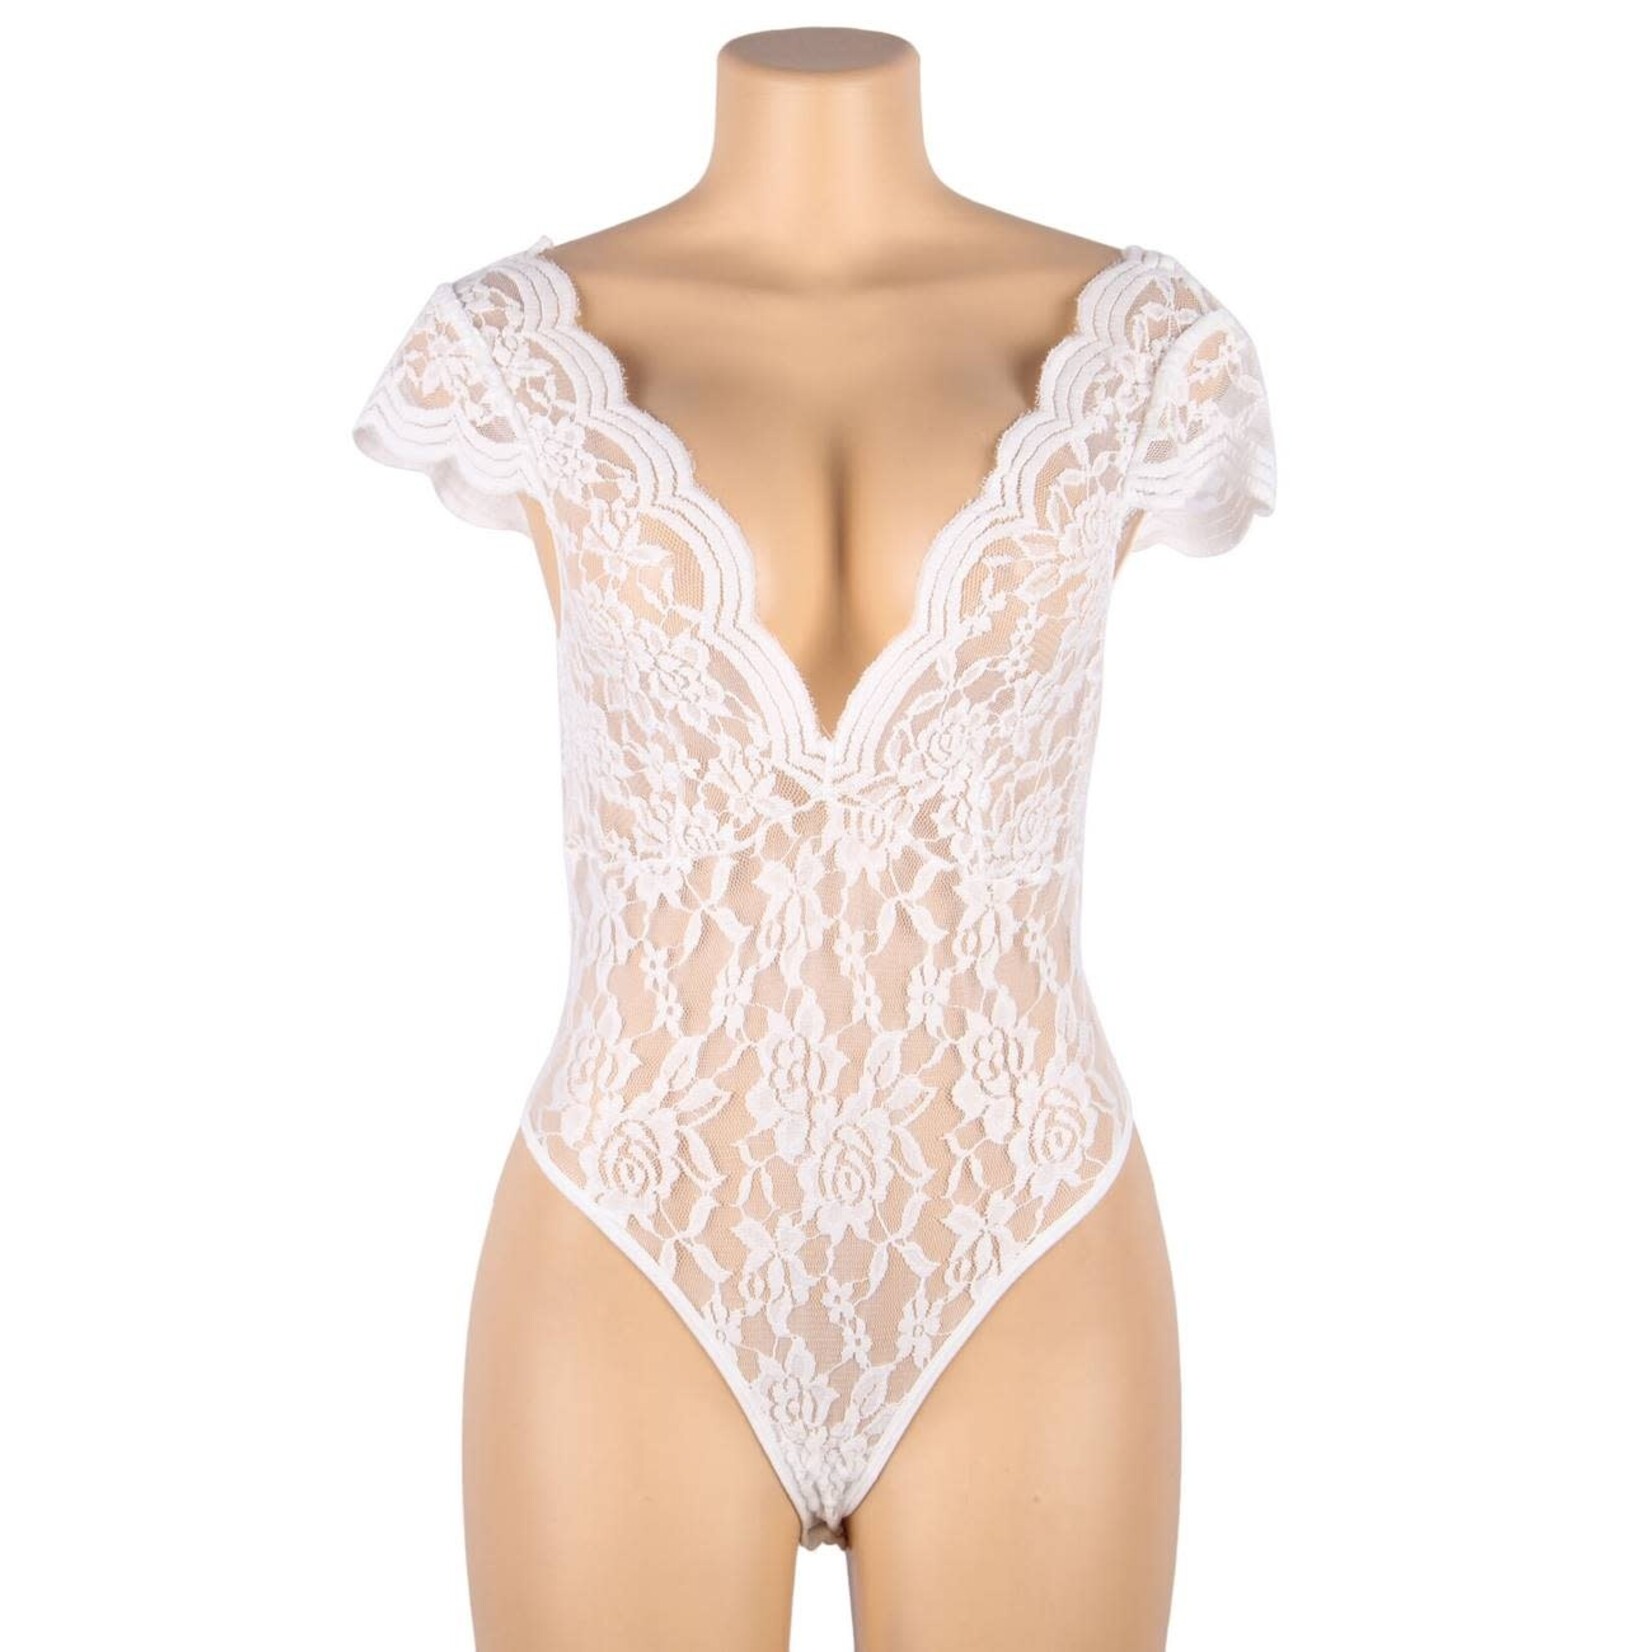 OH YEAH! -  SEXY WHITE DEEP V BACKLESS FULL LACE TEDDY M-L